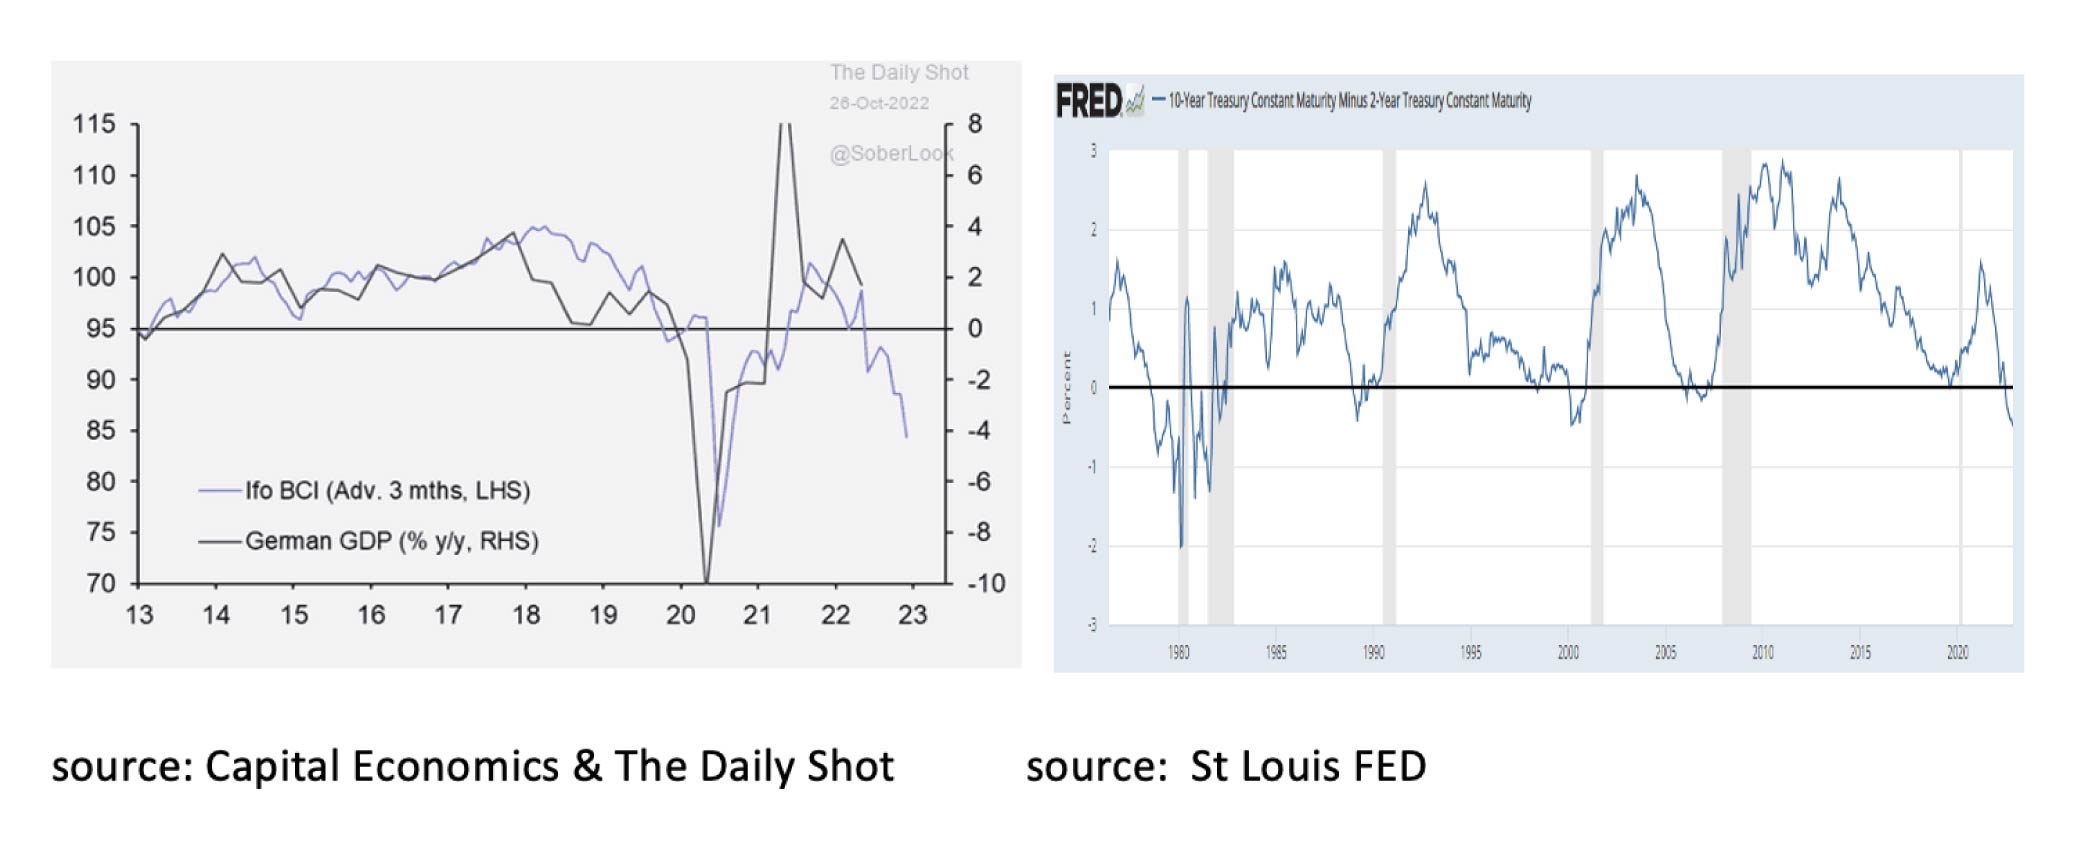 IFO & Yield curve show recession